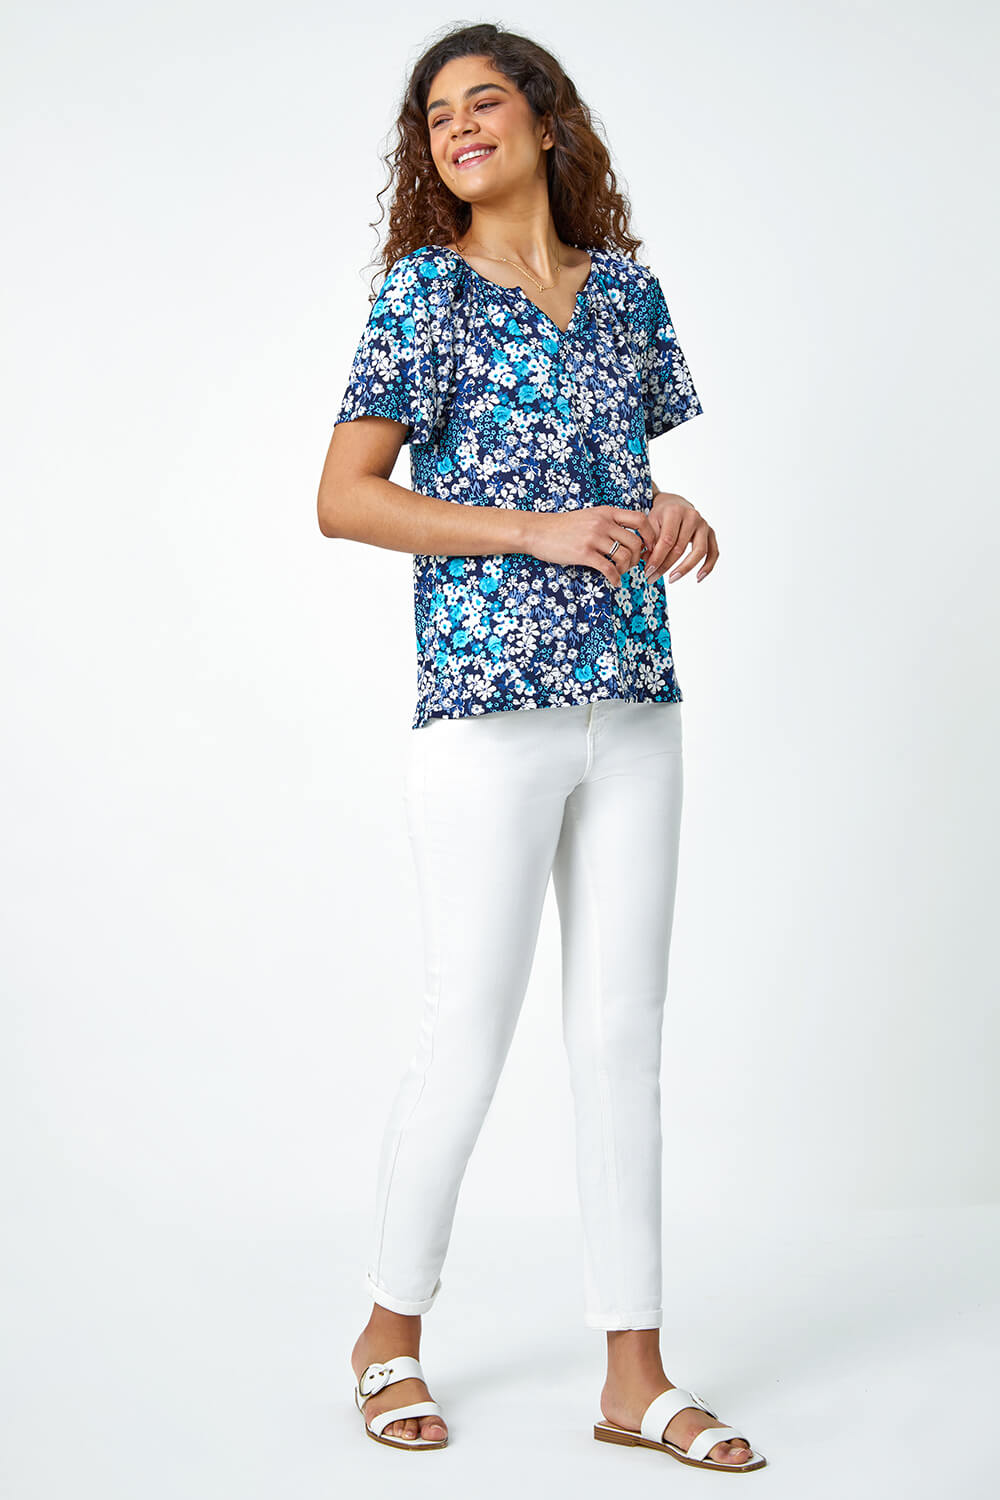 Blue Textured Floral Print Stretch T-Shirt, Image 2 of 5